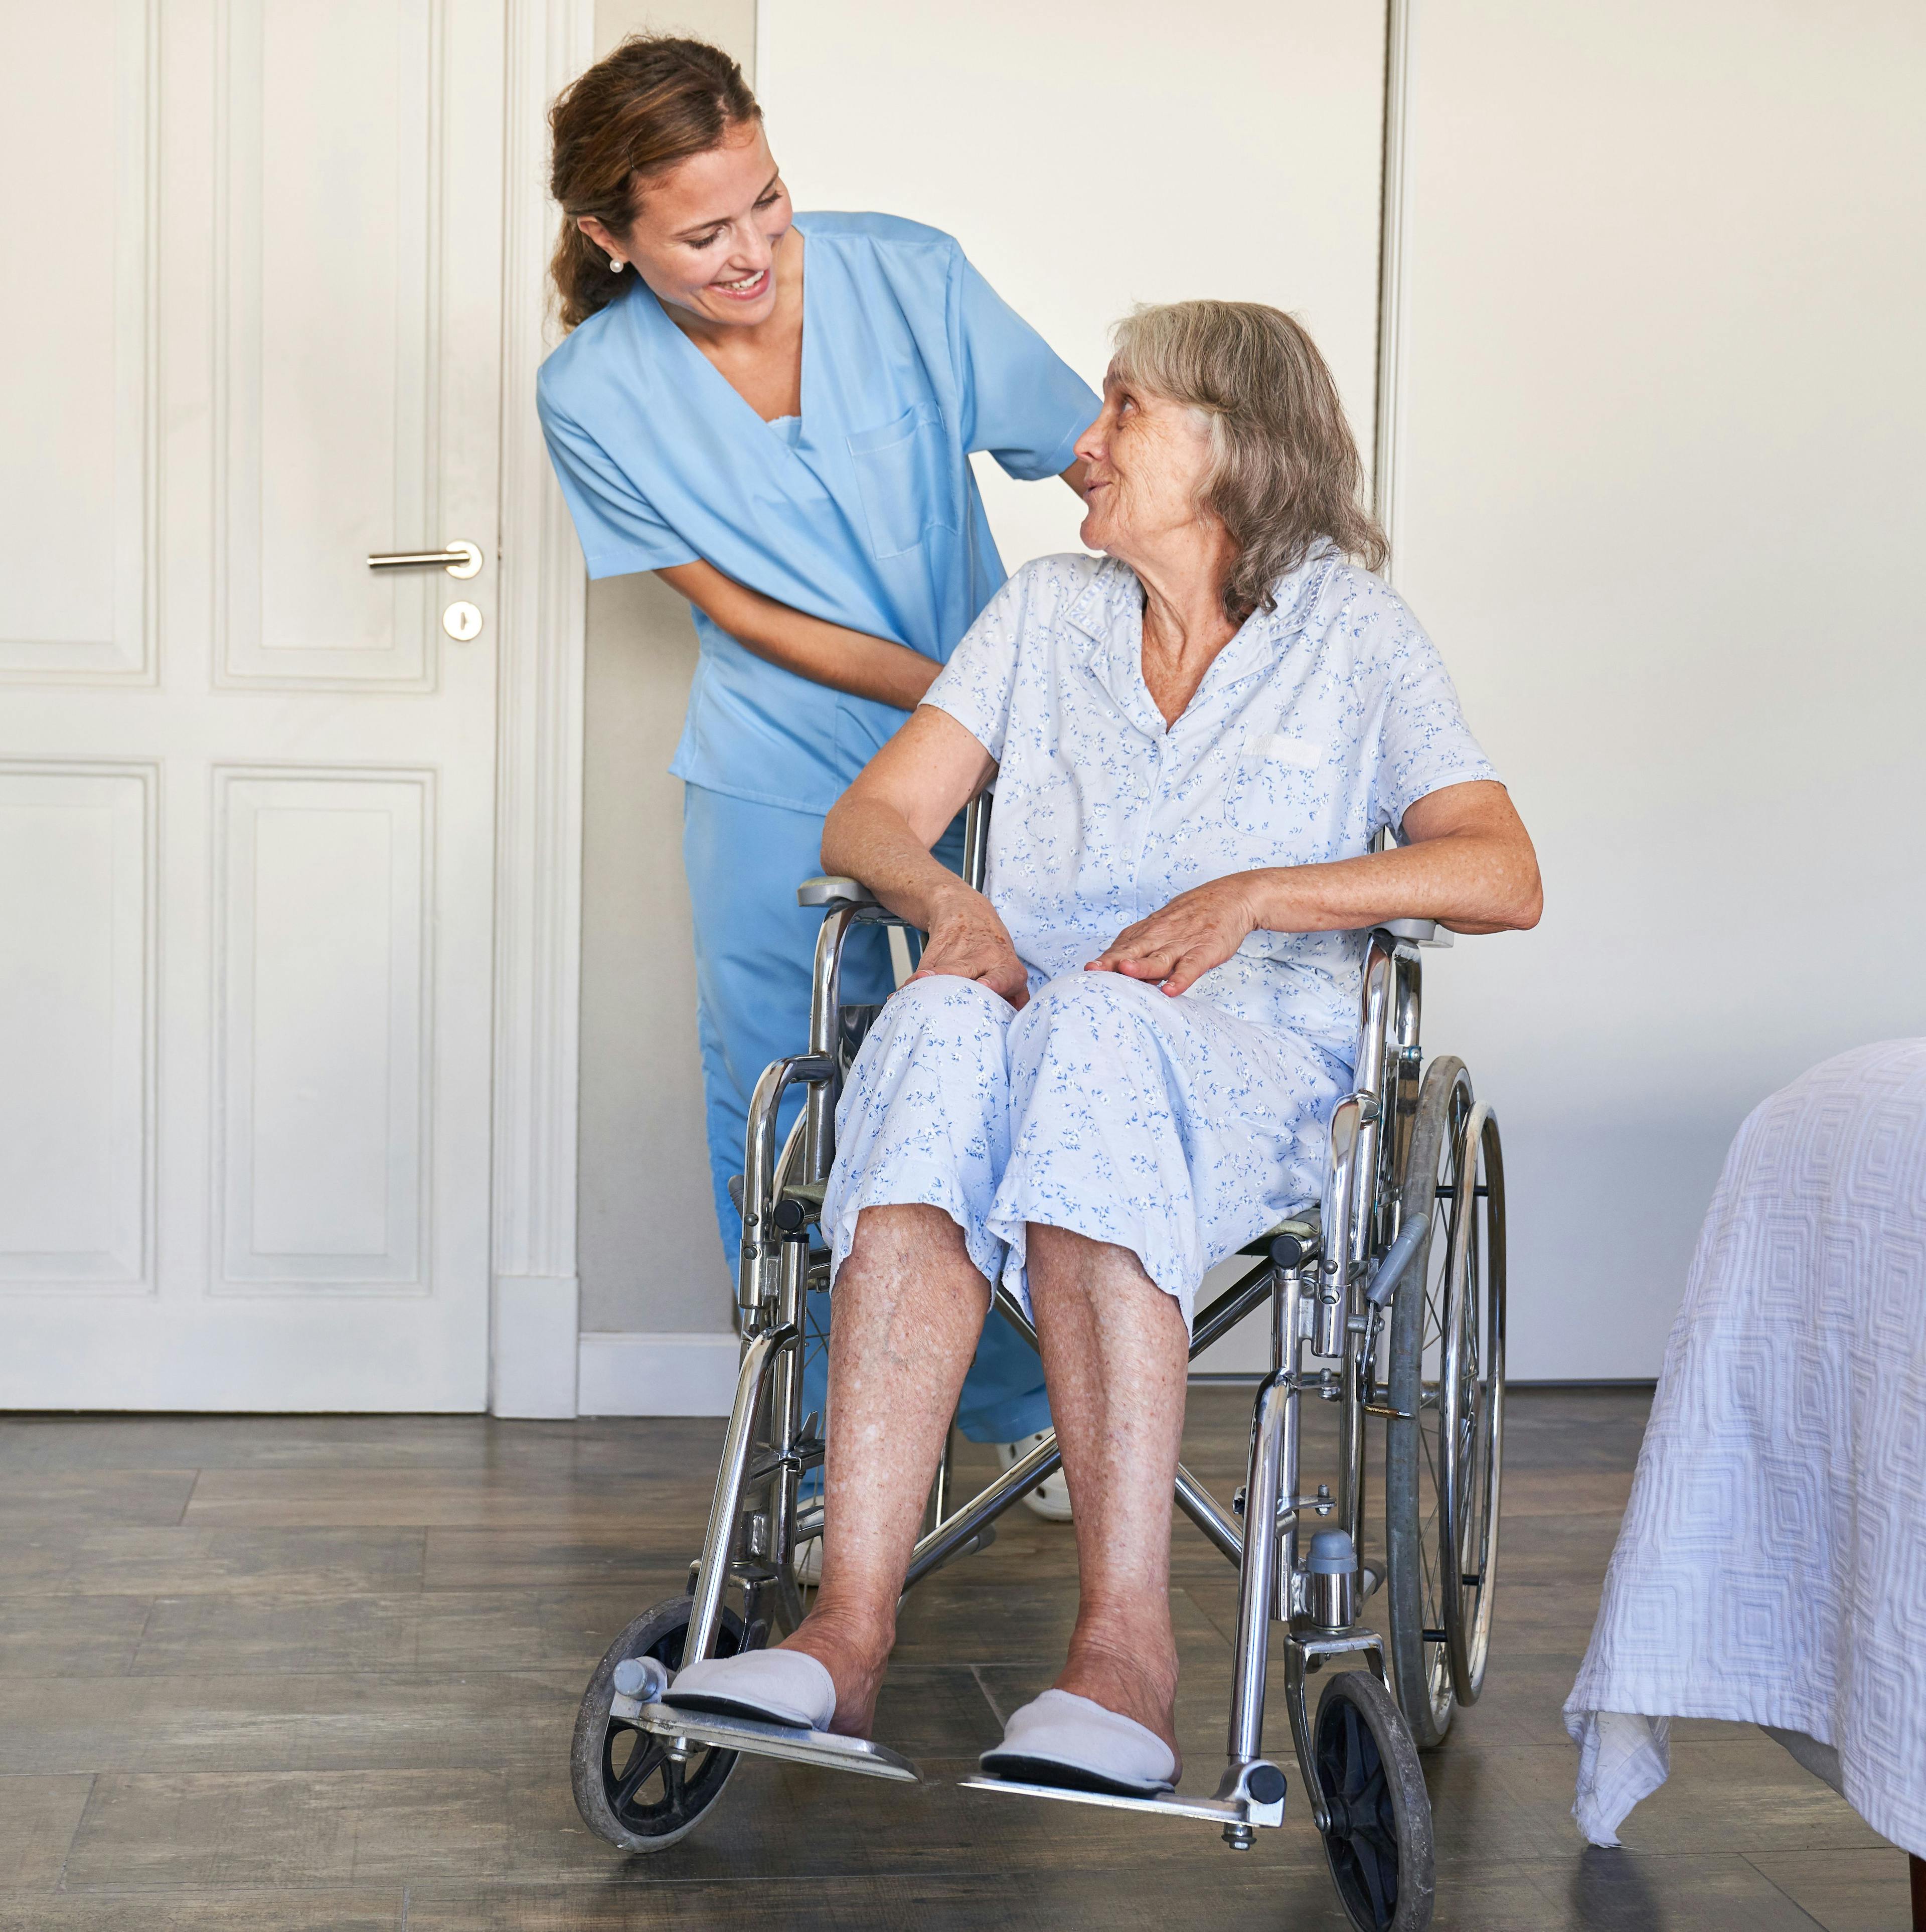 Frailty Screening Tool may Miss Early Intervention for Hospitalized COPD Patients